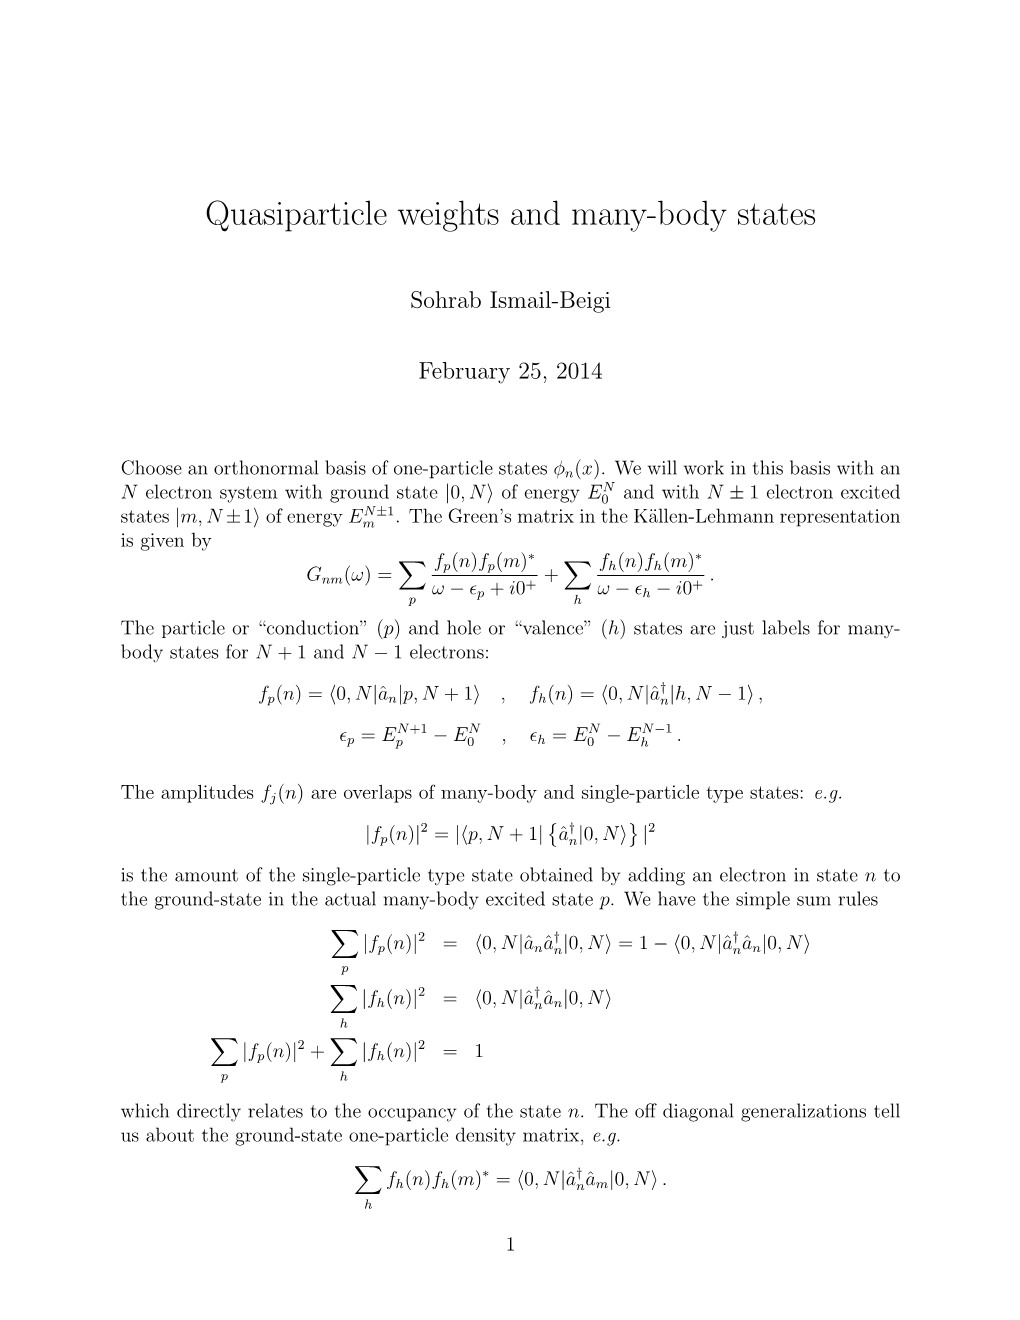 Quasiparticle Weights and Many-Body States